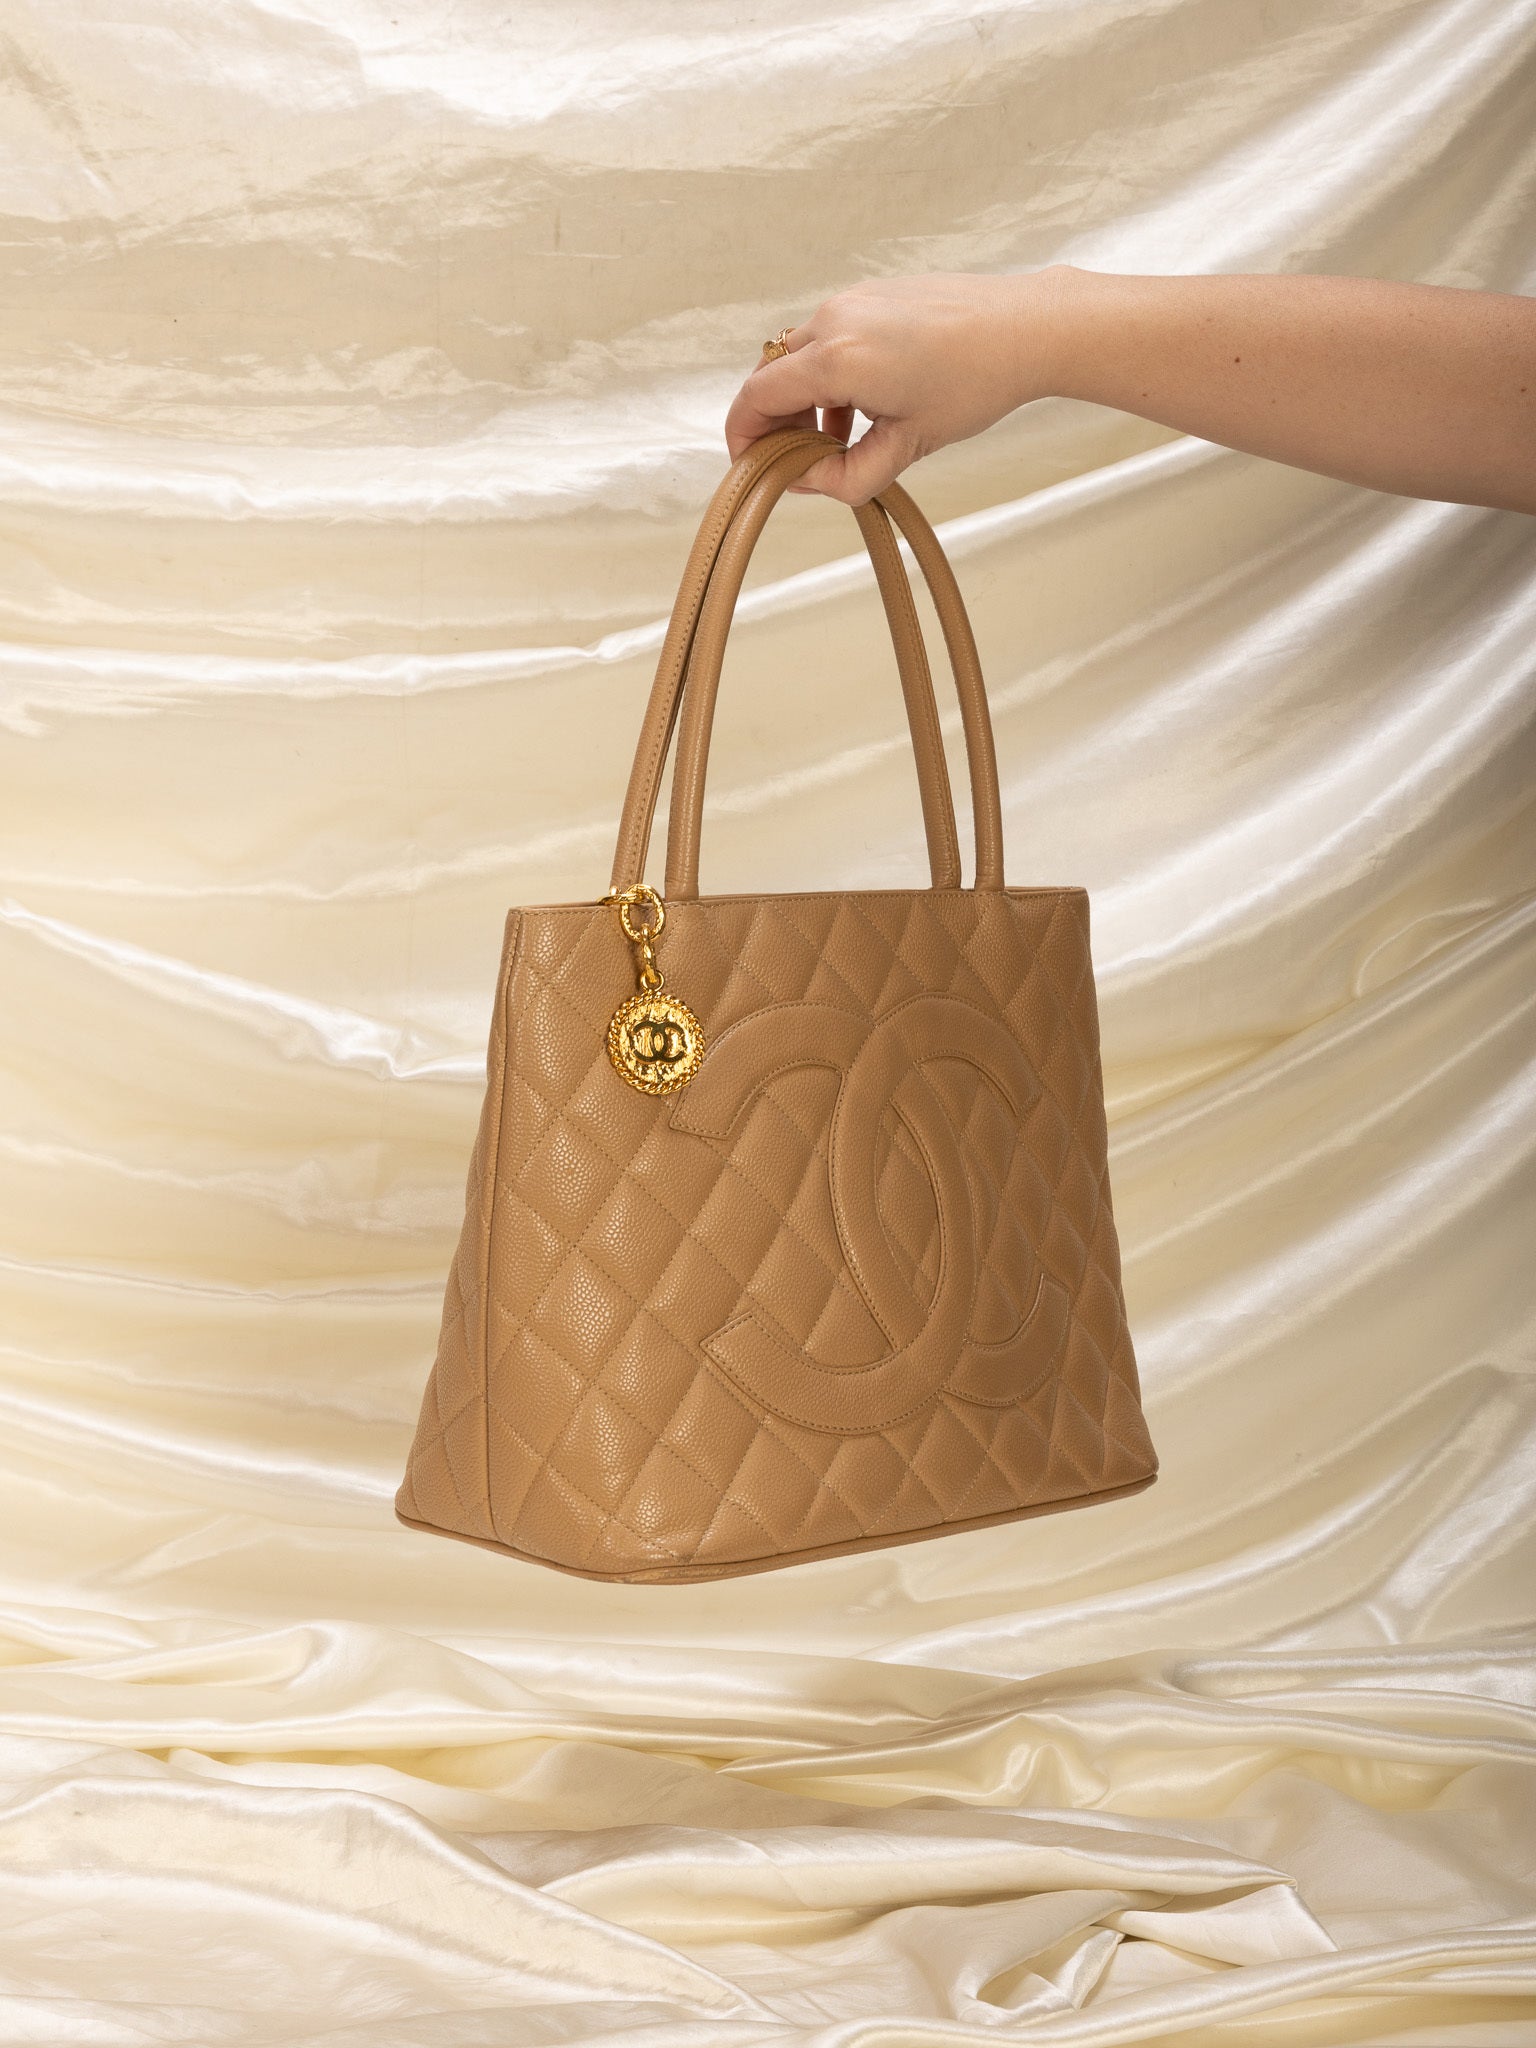 Chanel // 2002 - 2003 Beige Caviar Leather Medallion Tote Bag